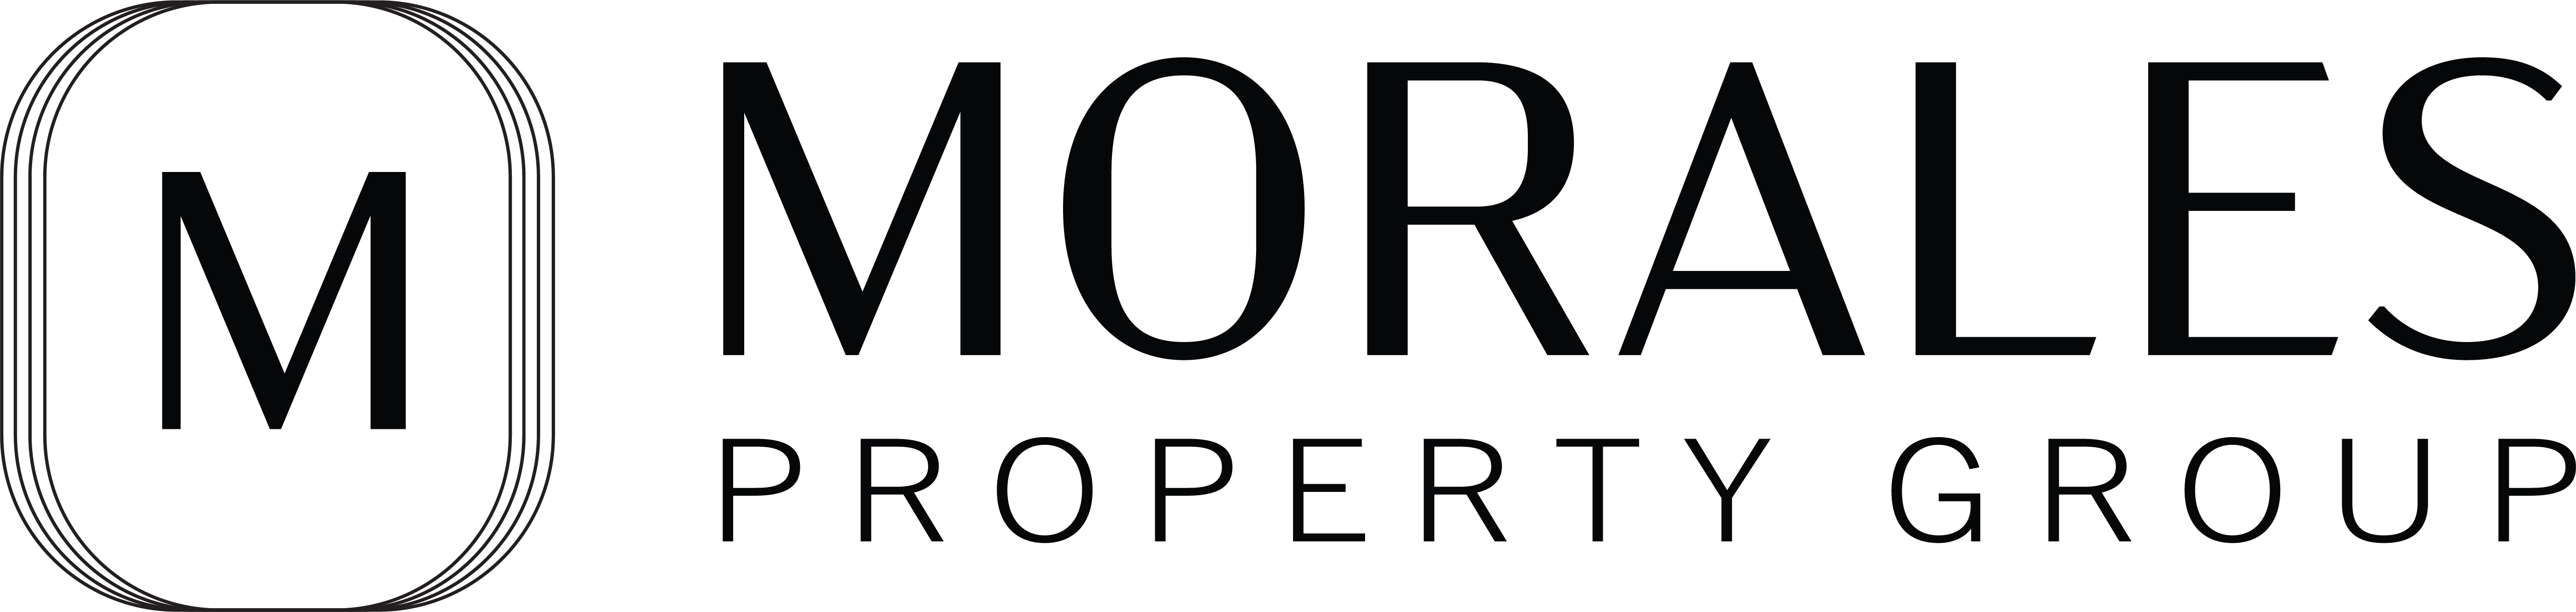 Morales Property Group 